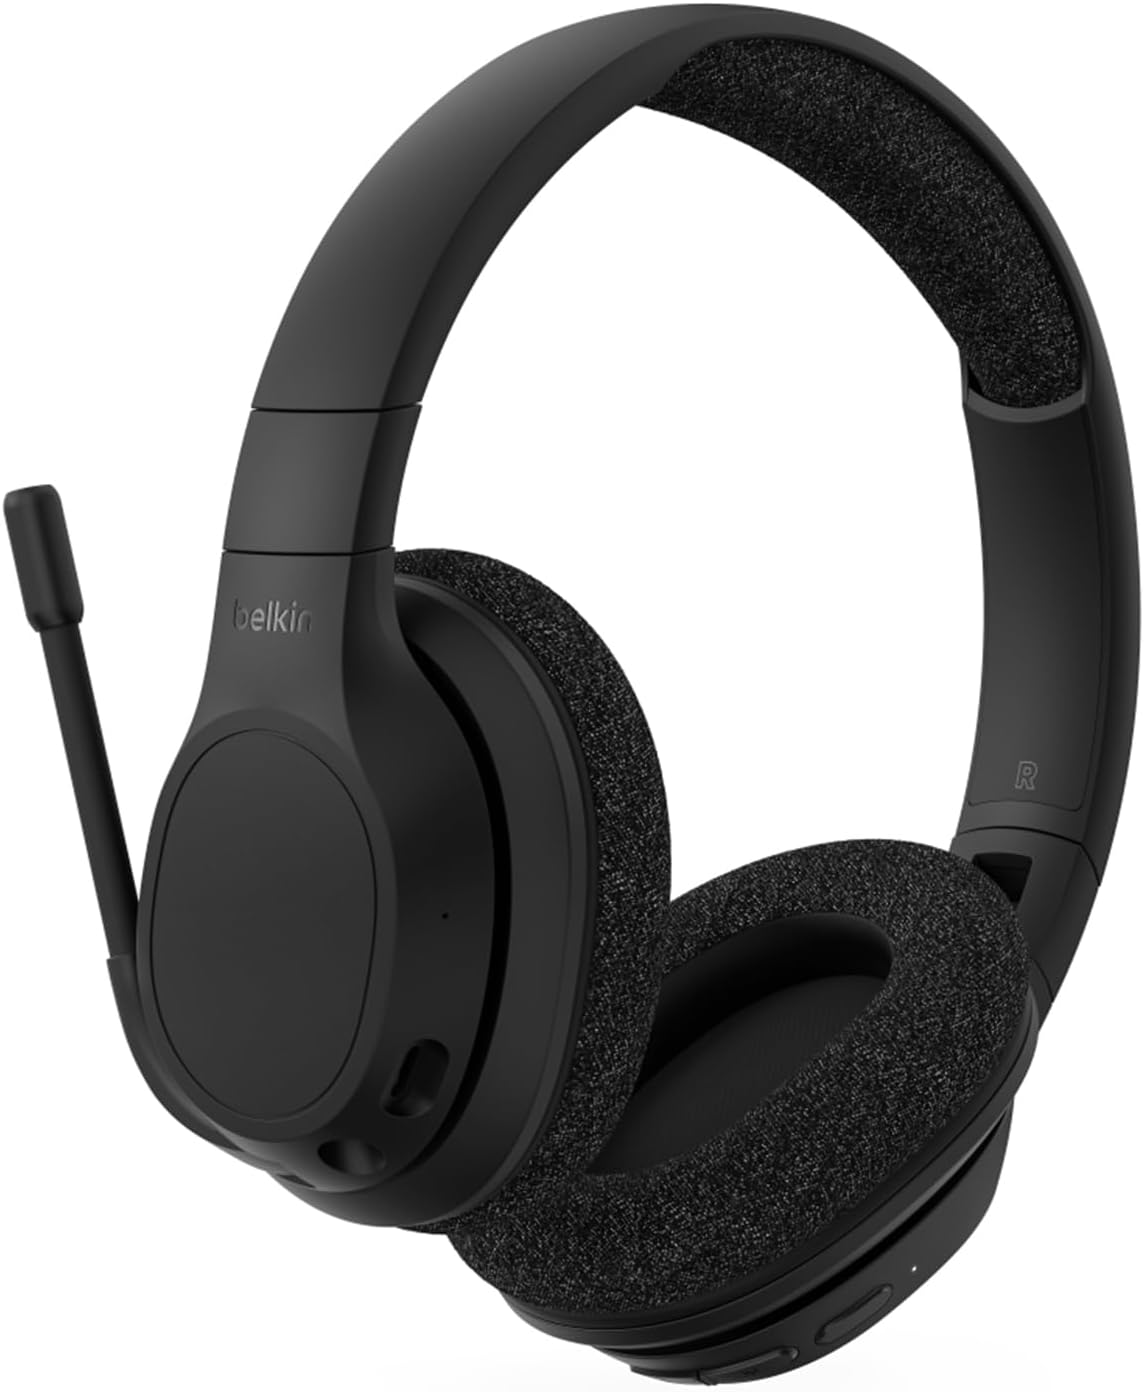 Belkin SoundForm Adapt Wireless Over-Ear Headset, Headphones for Work, Play, Gaming, & Travel with Built-In Boom Microphone - Compatible with iPhone, iPad, Galaxy, and More - Black